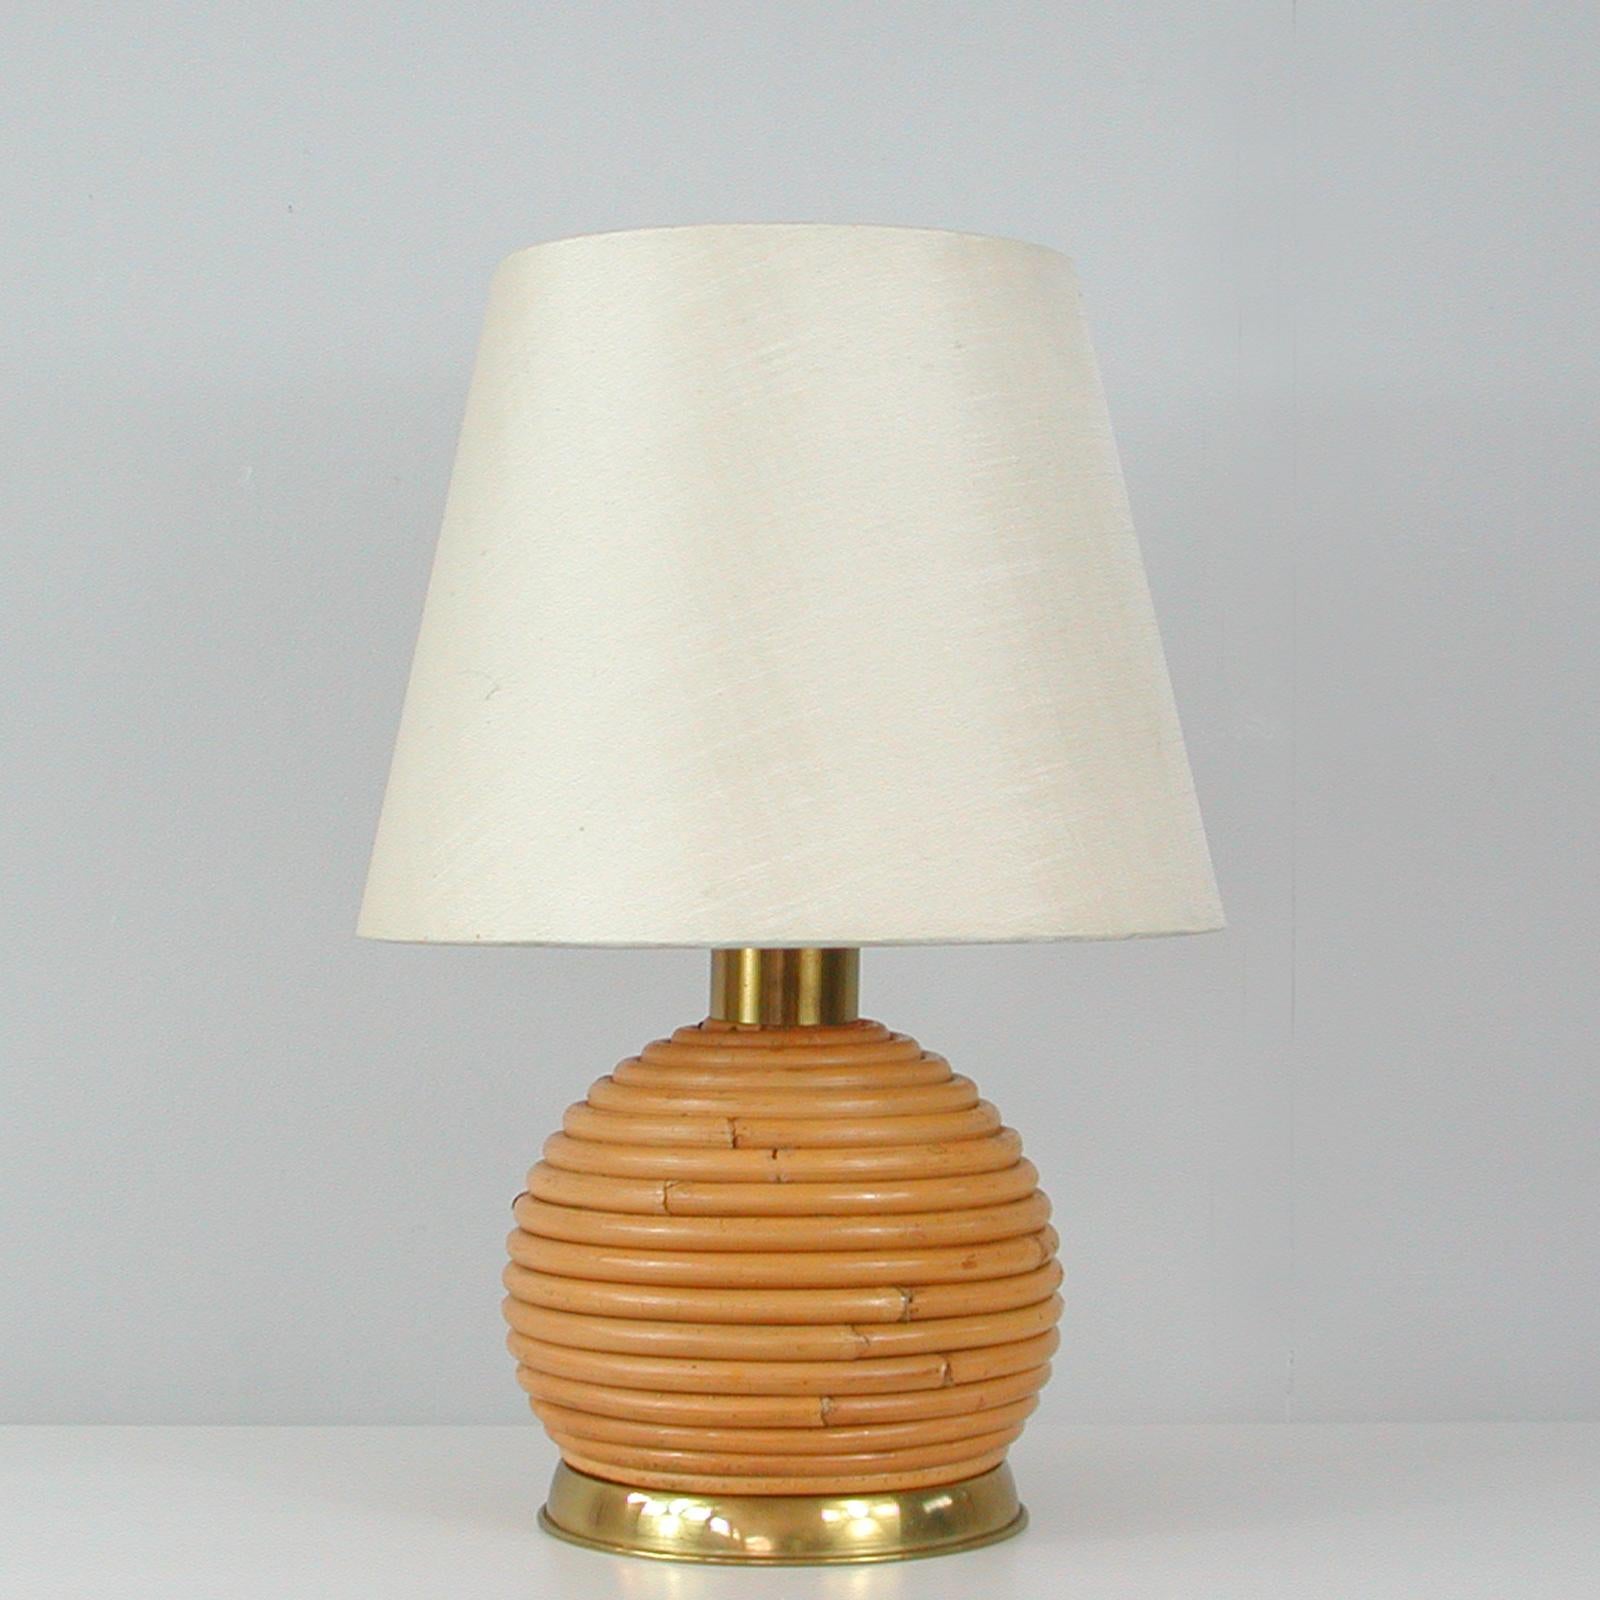 This unusual table lamp was designed and manufactured in Sweden in the 1960s. It features a globe shaped rattan or wicker base with brass hardware. The original shade is made of cream colored silk.

Good original condition with one E27 socket and